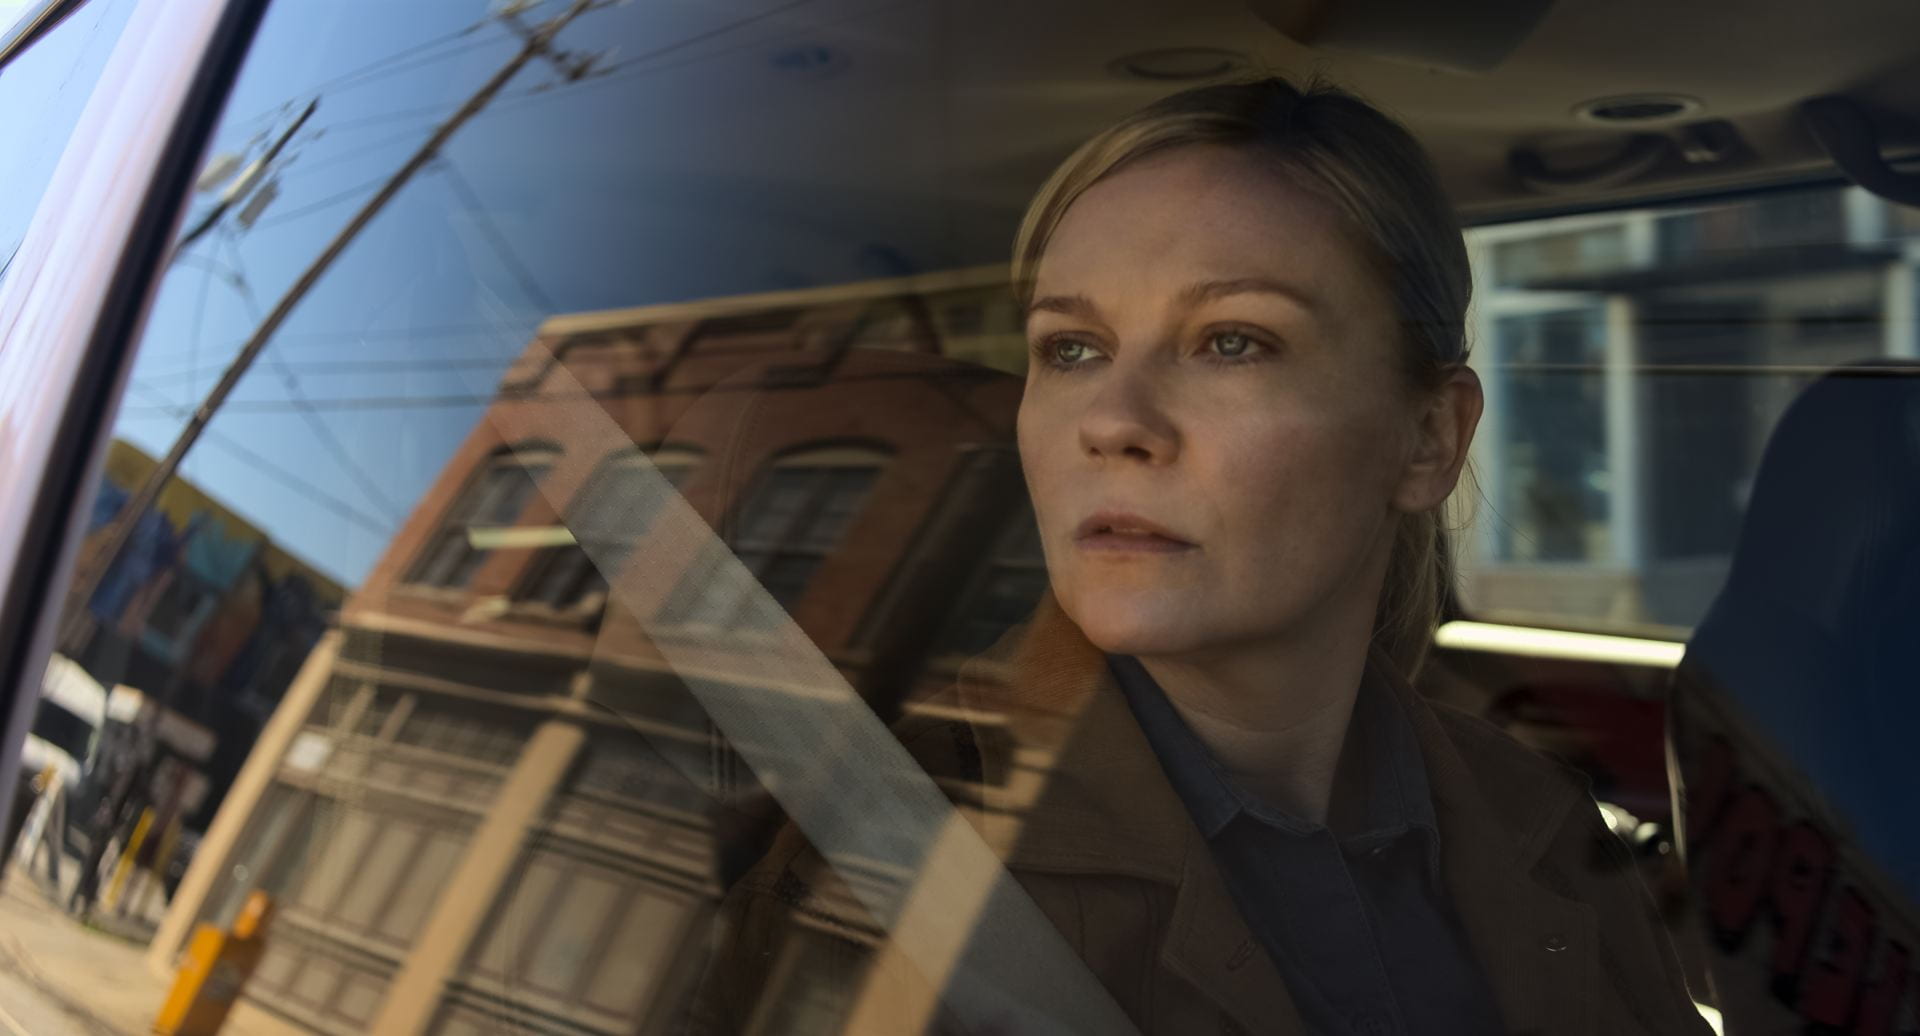 In the near future, a war photographer (Kirsten Dunst) witnesses a nation on the brink in "Civil War." Credit: A24 (via. TNS)